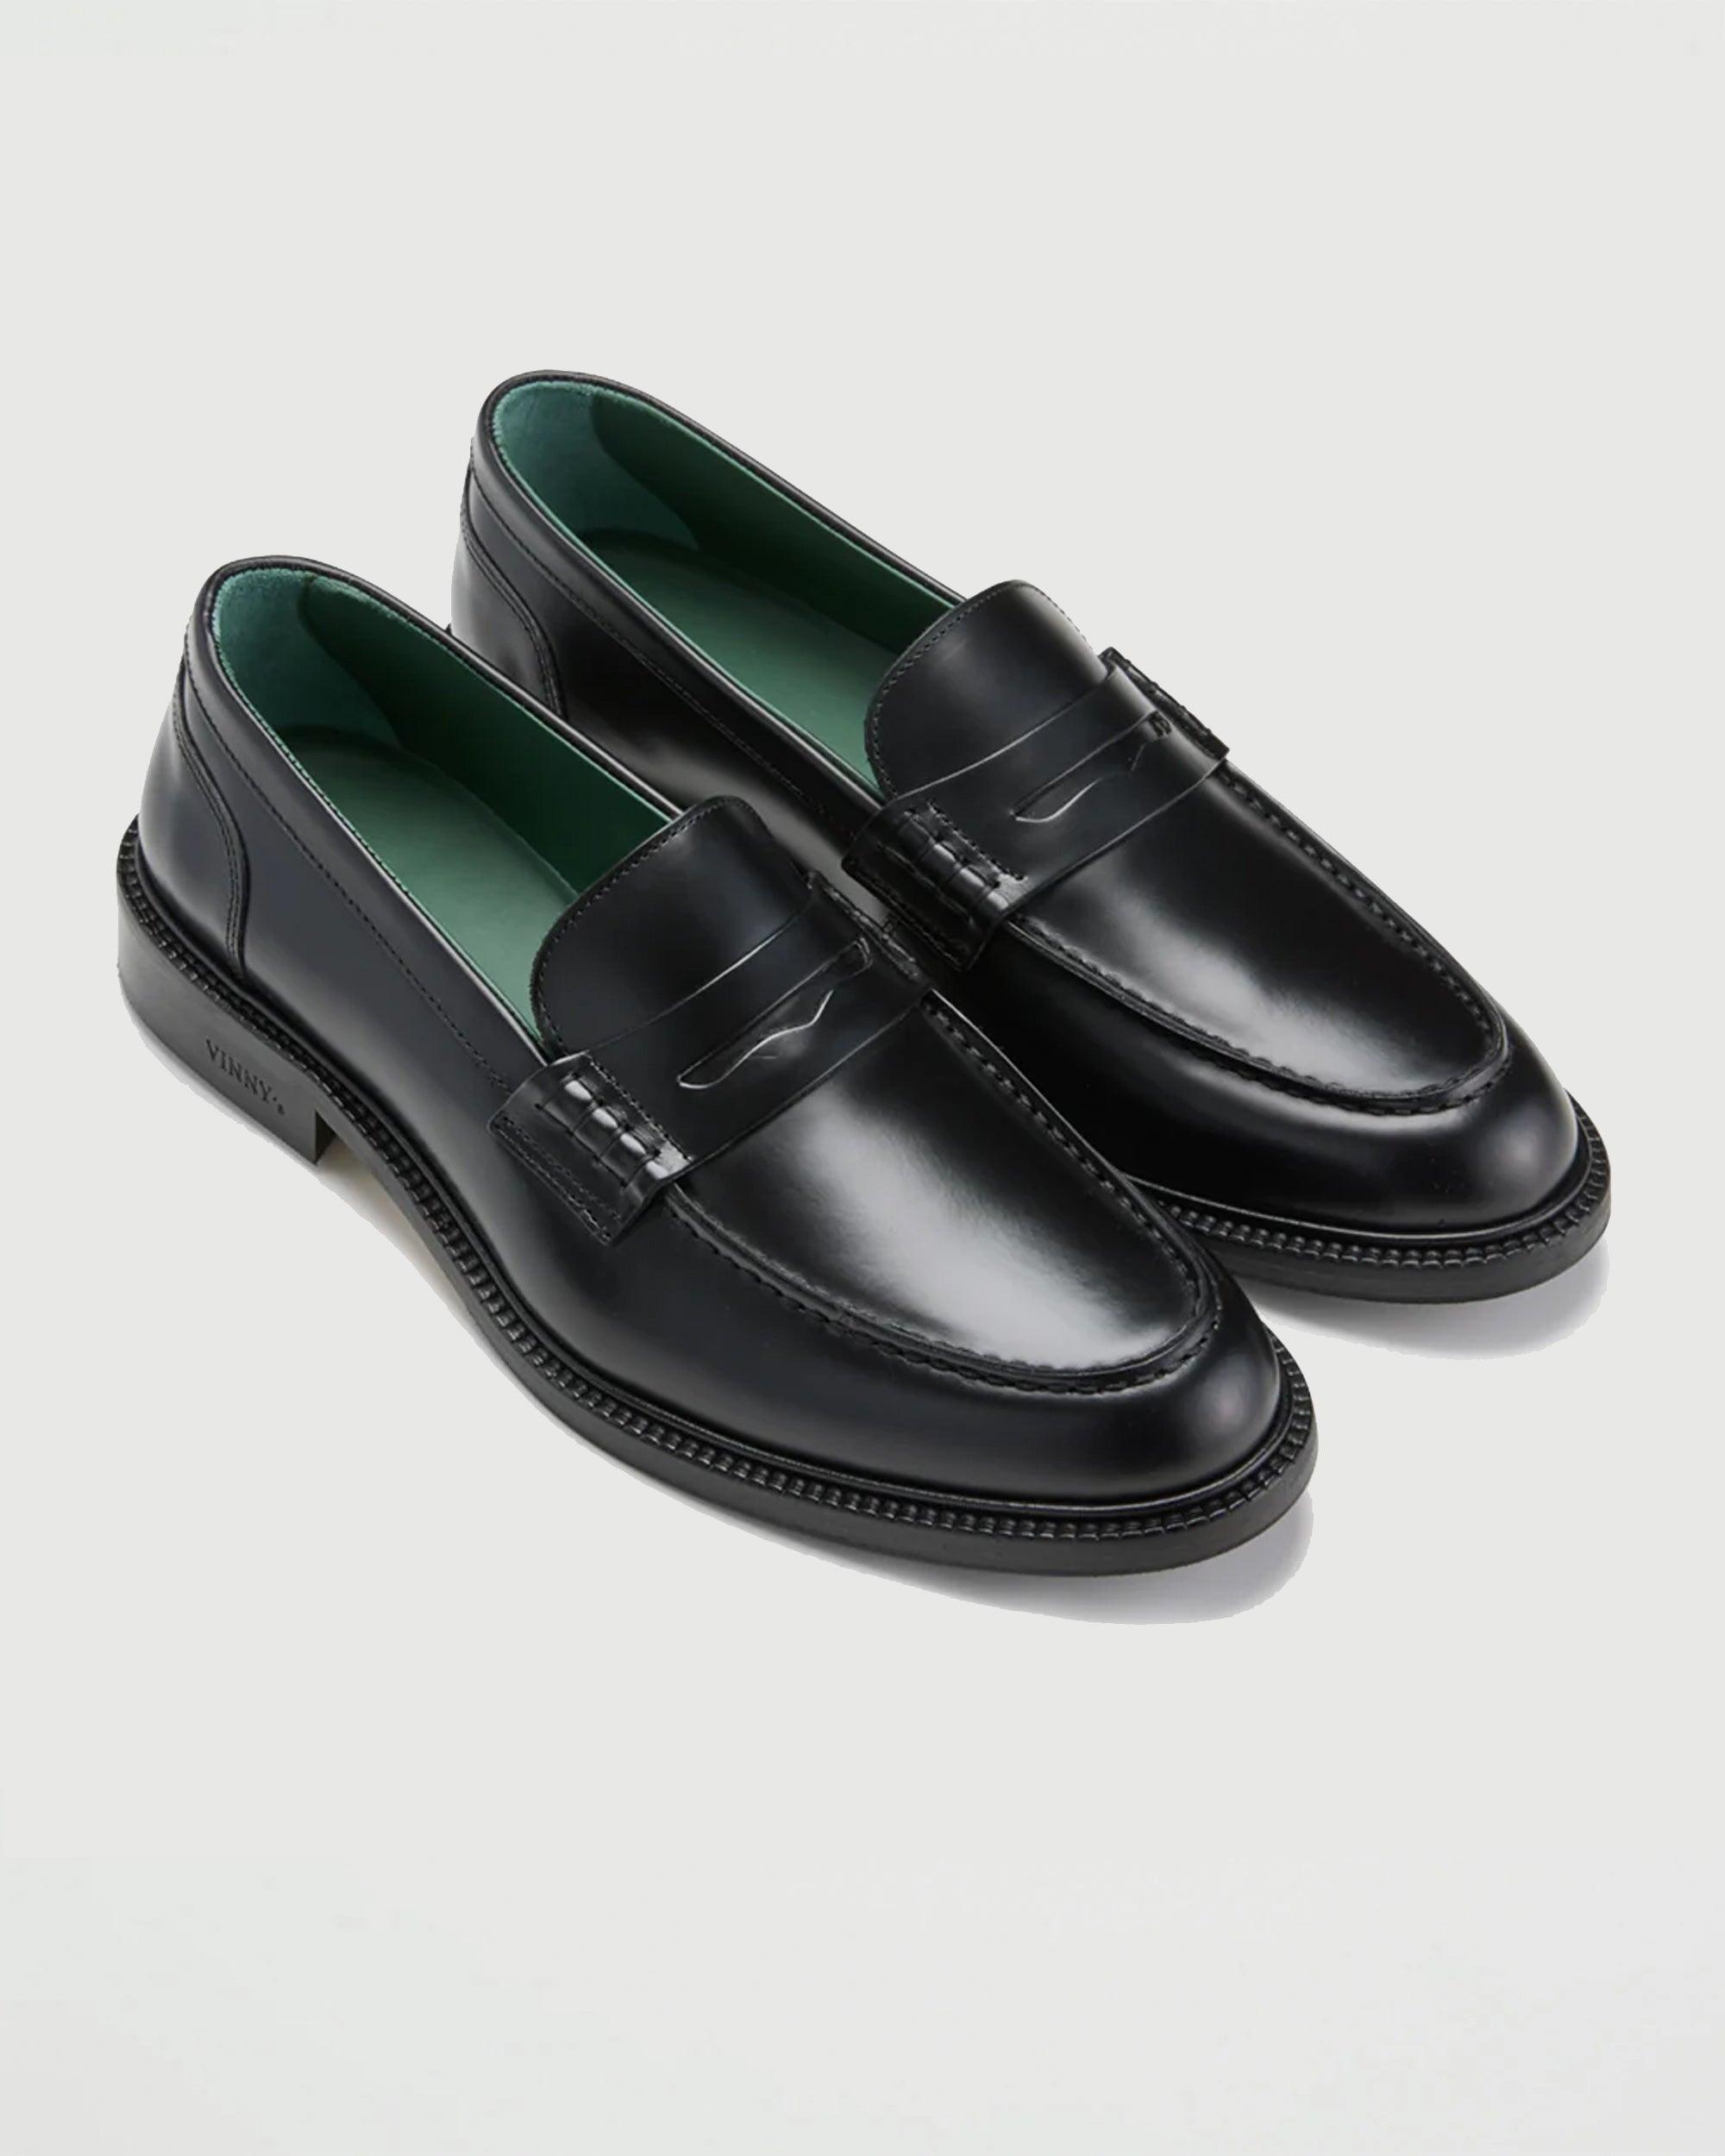 VINNY's Townee Penny Loafer Black Shoes Leather Unisex